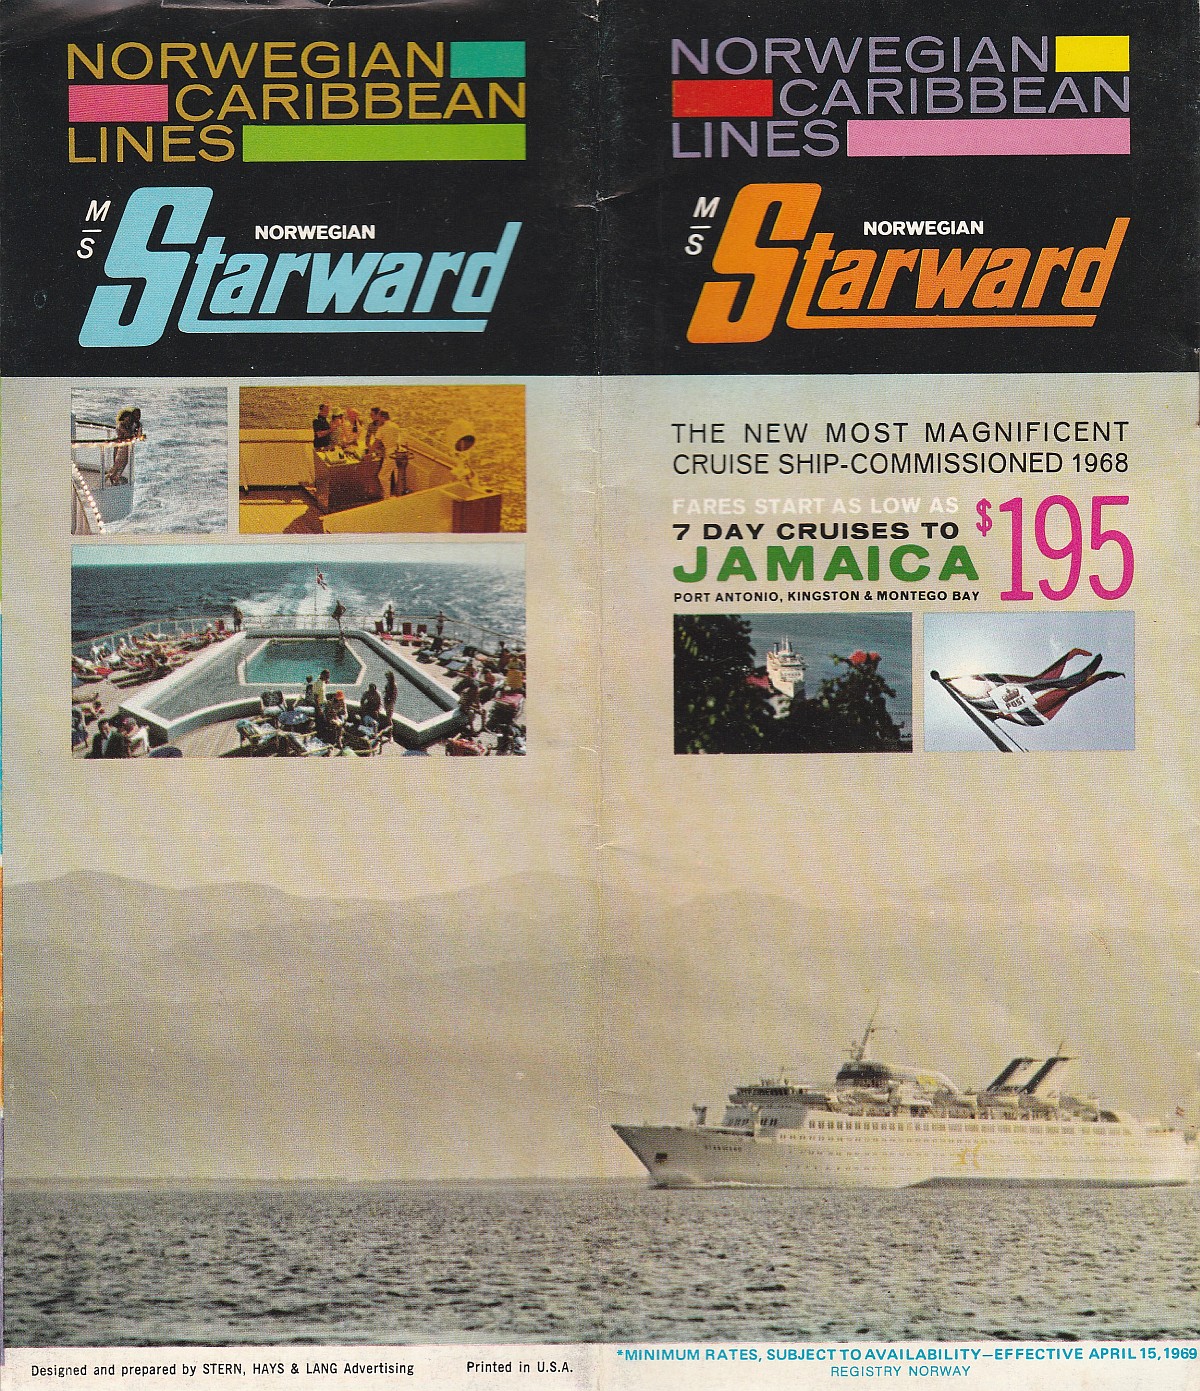 ms Starward effective April 15, 1969: The newest most magnificent cruise ship - commissioned 1968